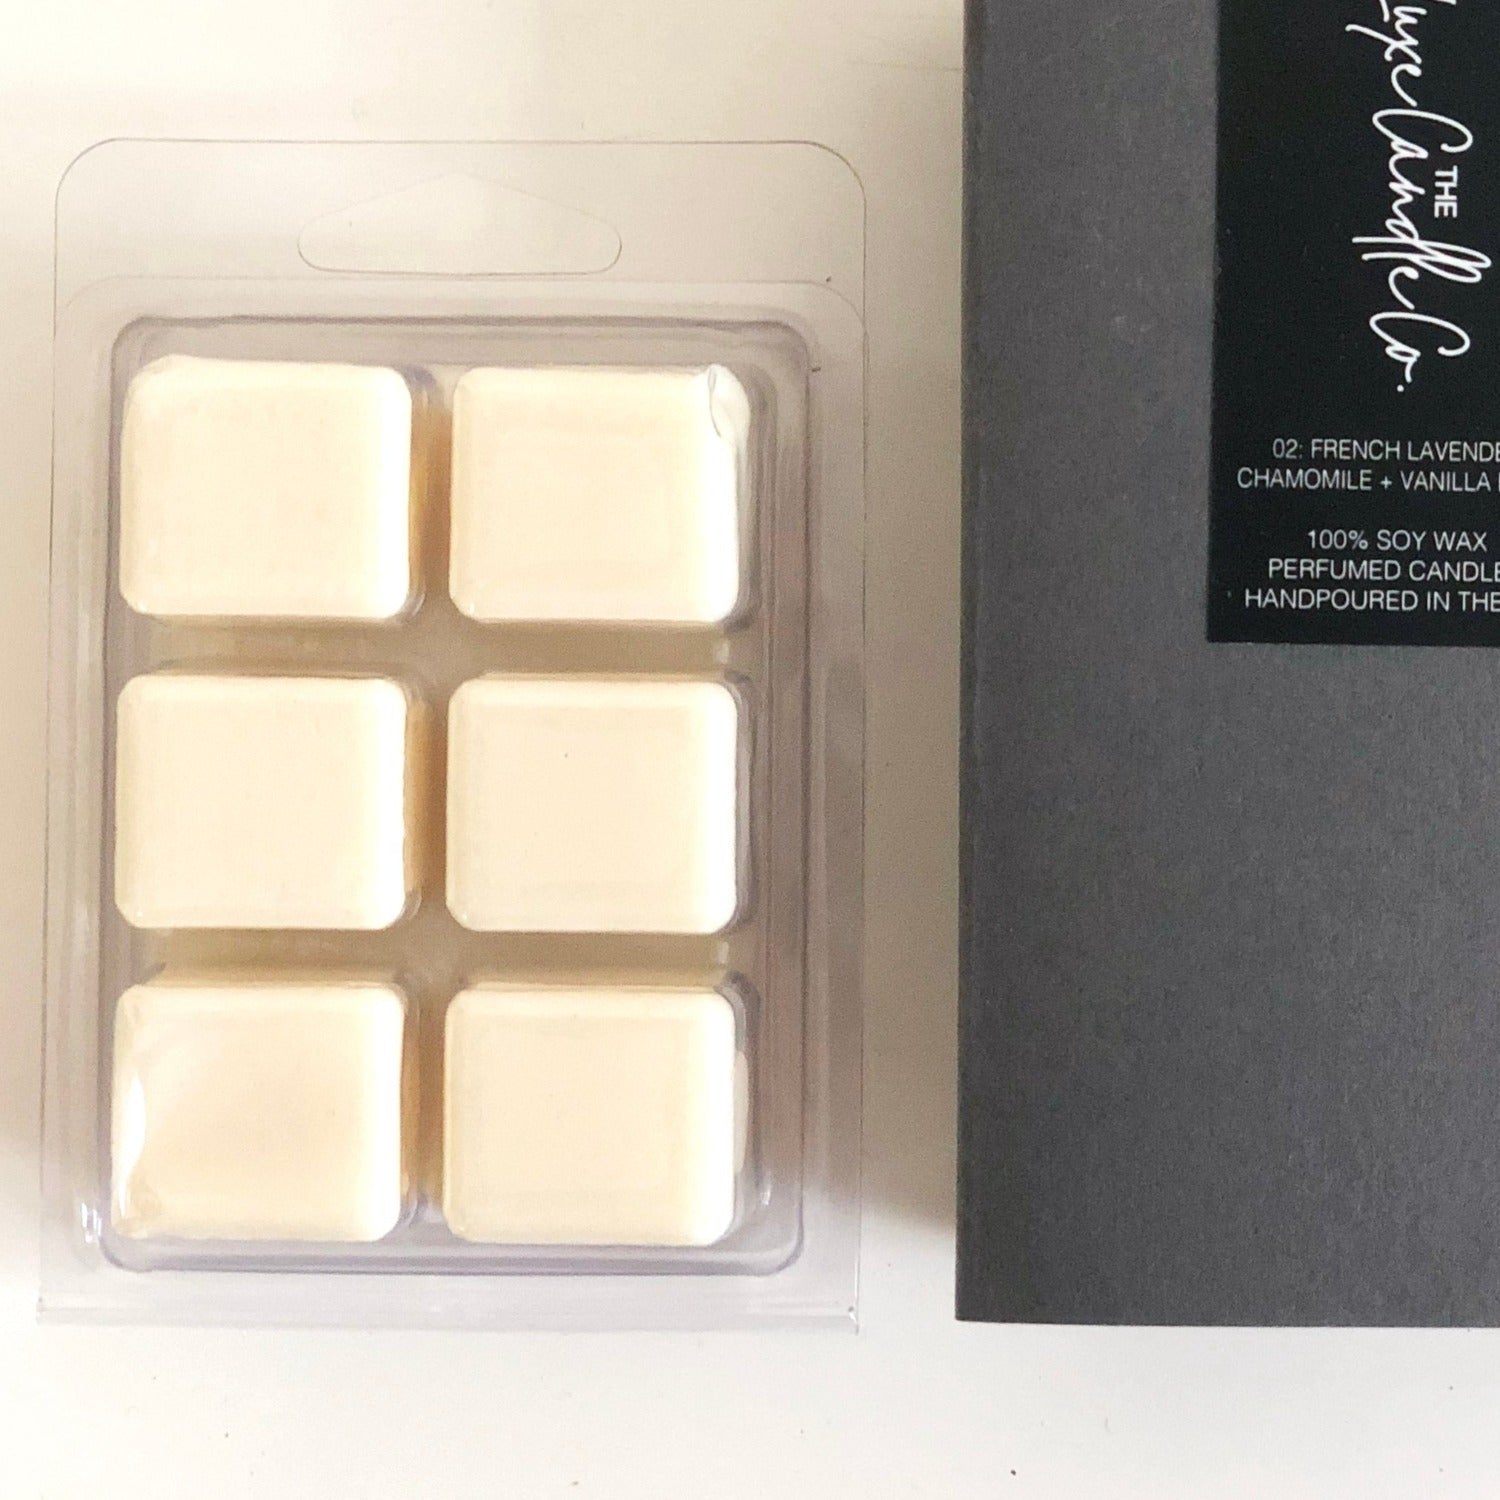 Coconut gift set with soy wax melts | Best gift idea for coconut lover UK